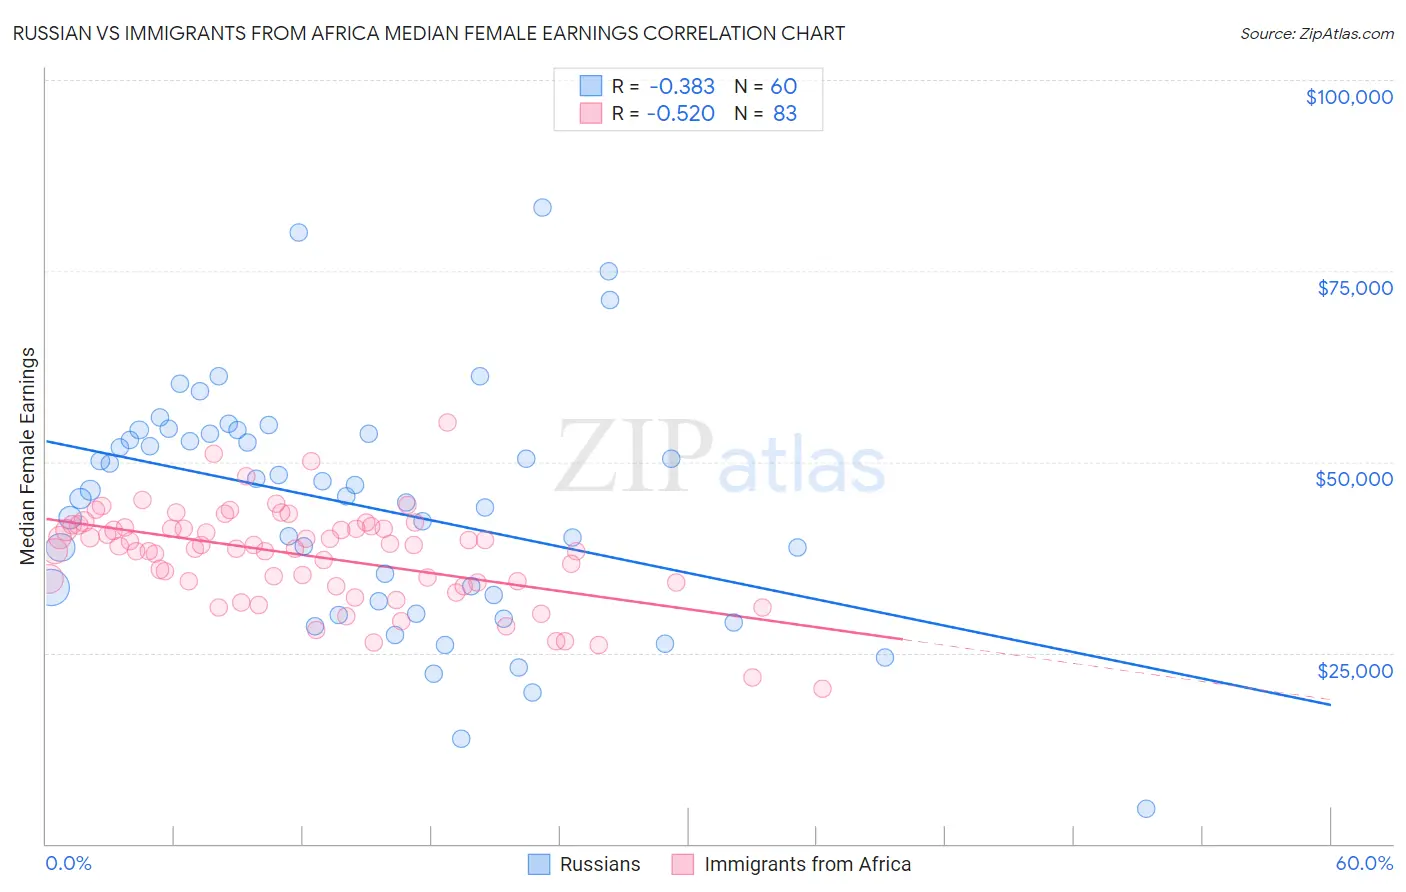 Russian vs Immigrants from Africa Median Female Earnings